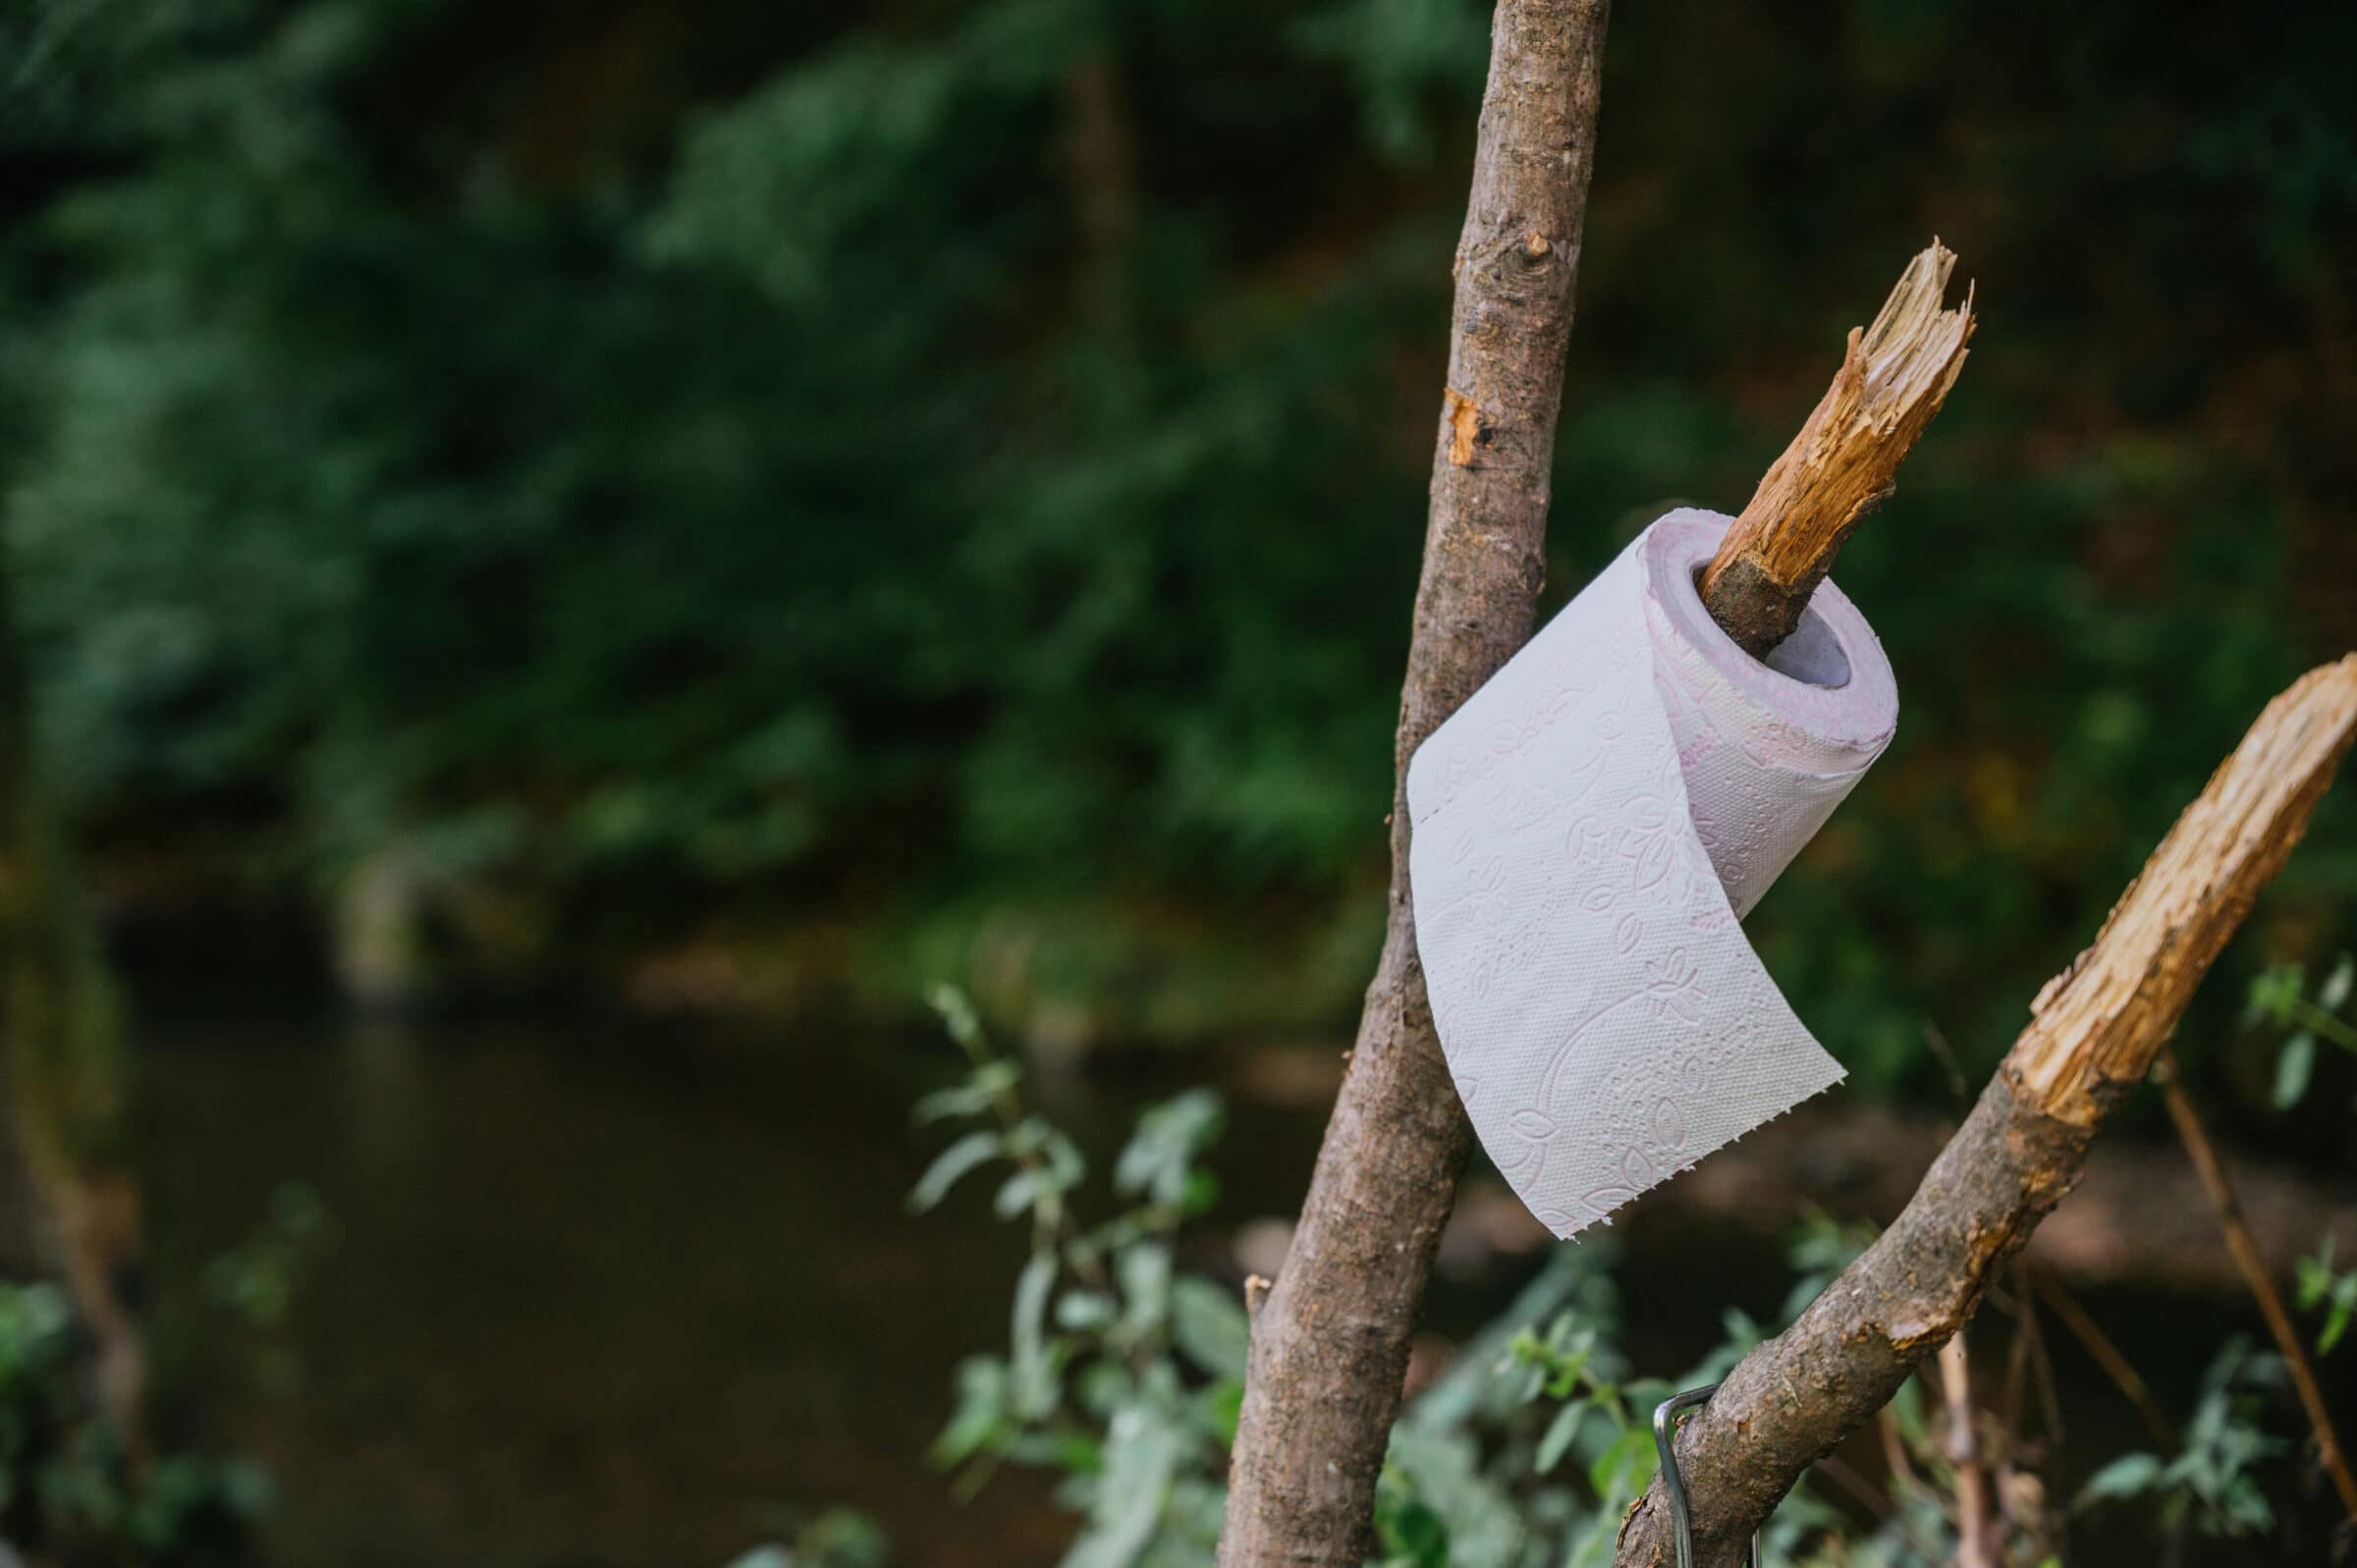 Toilet paper in the forest. Outdoor camping equipment.